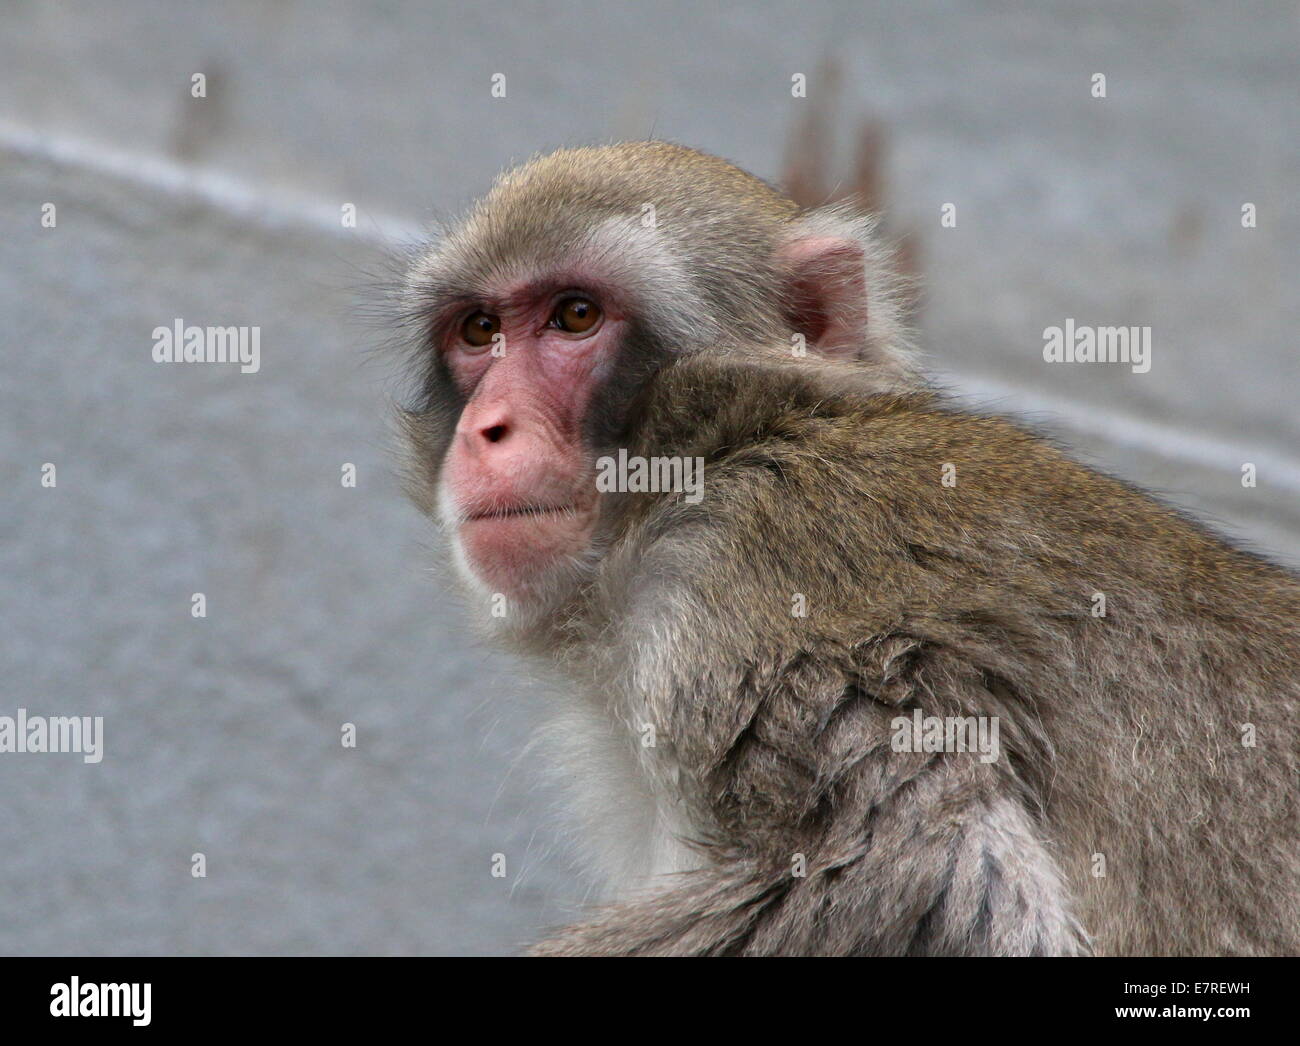 Japanese macaque or Snow monkey (Macaca fuscata) close-up at Artis Zoo, Amsterdam Stock Photo